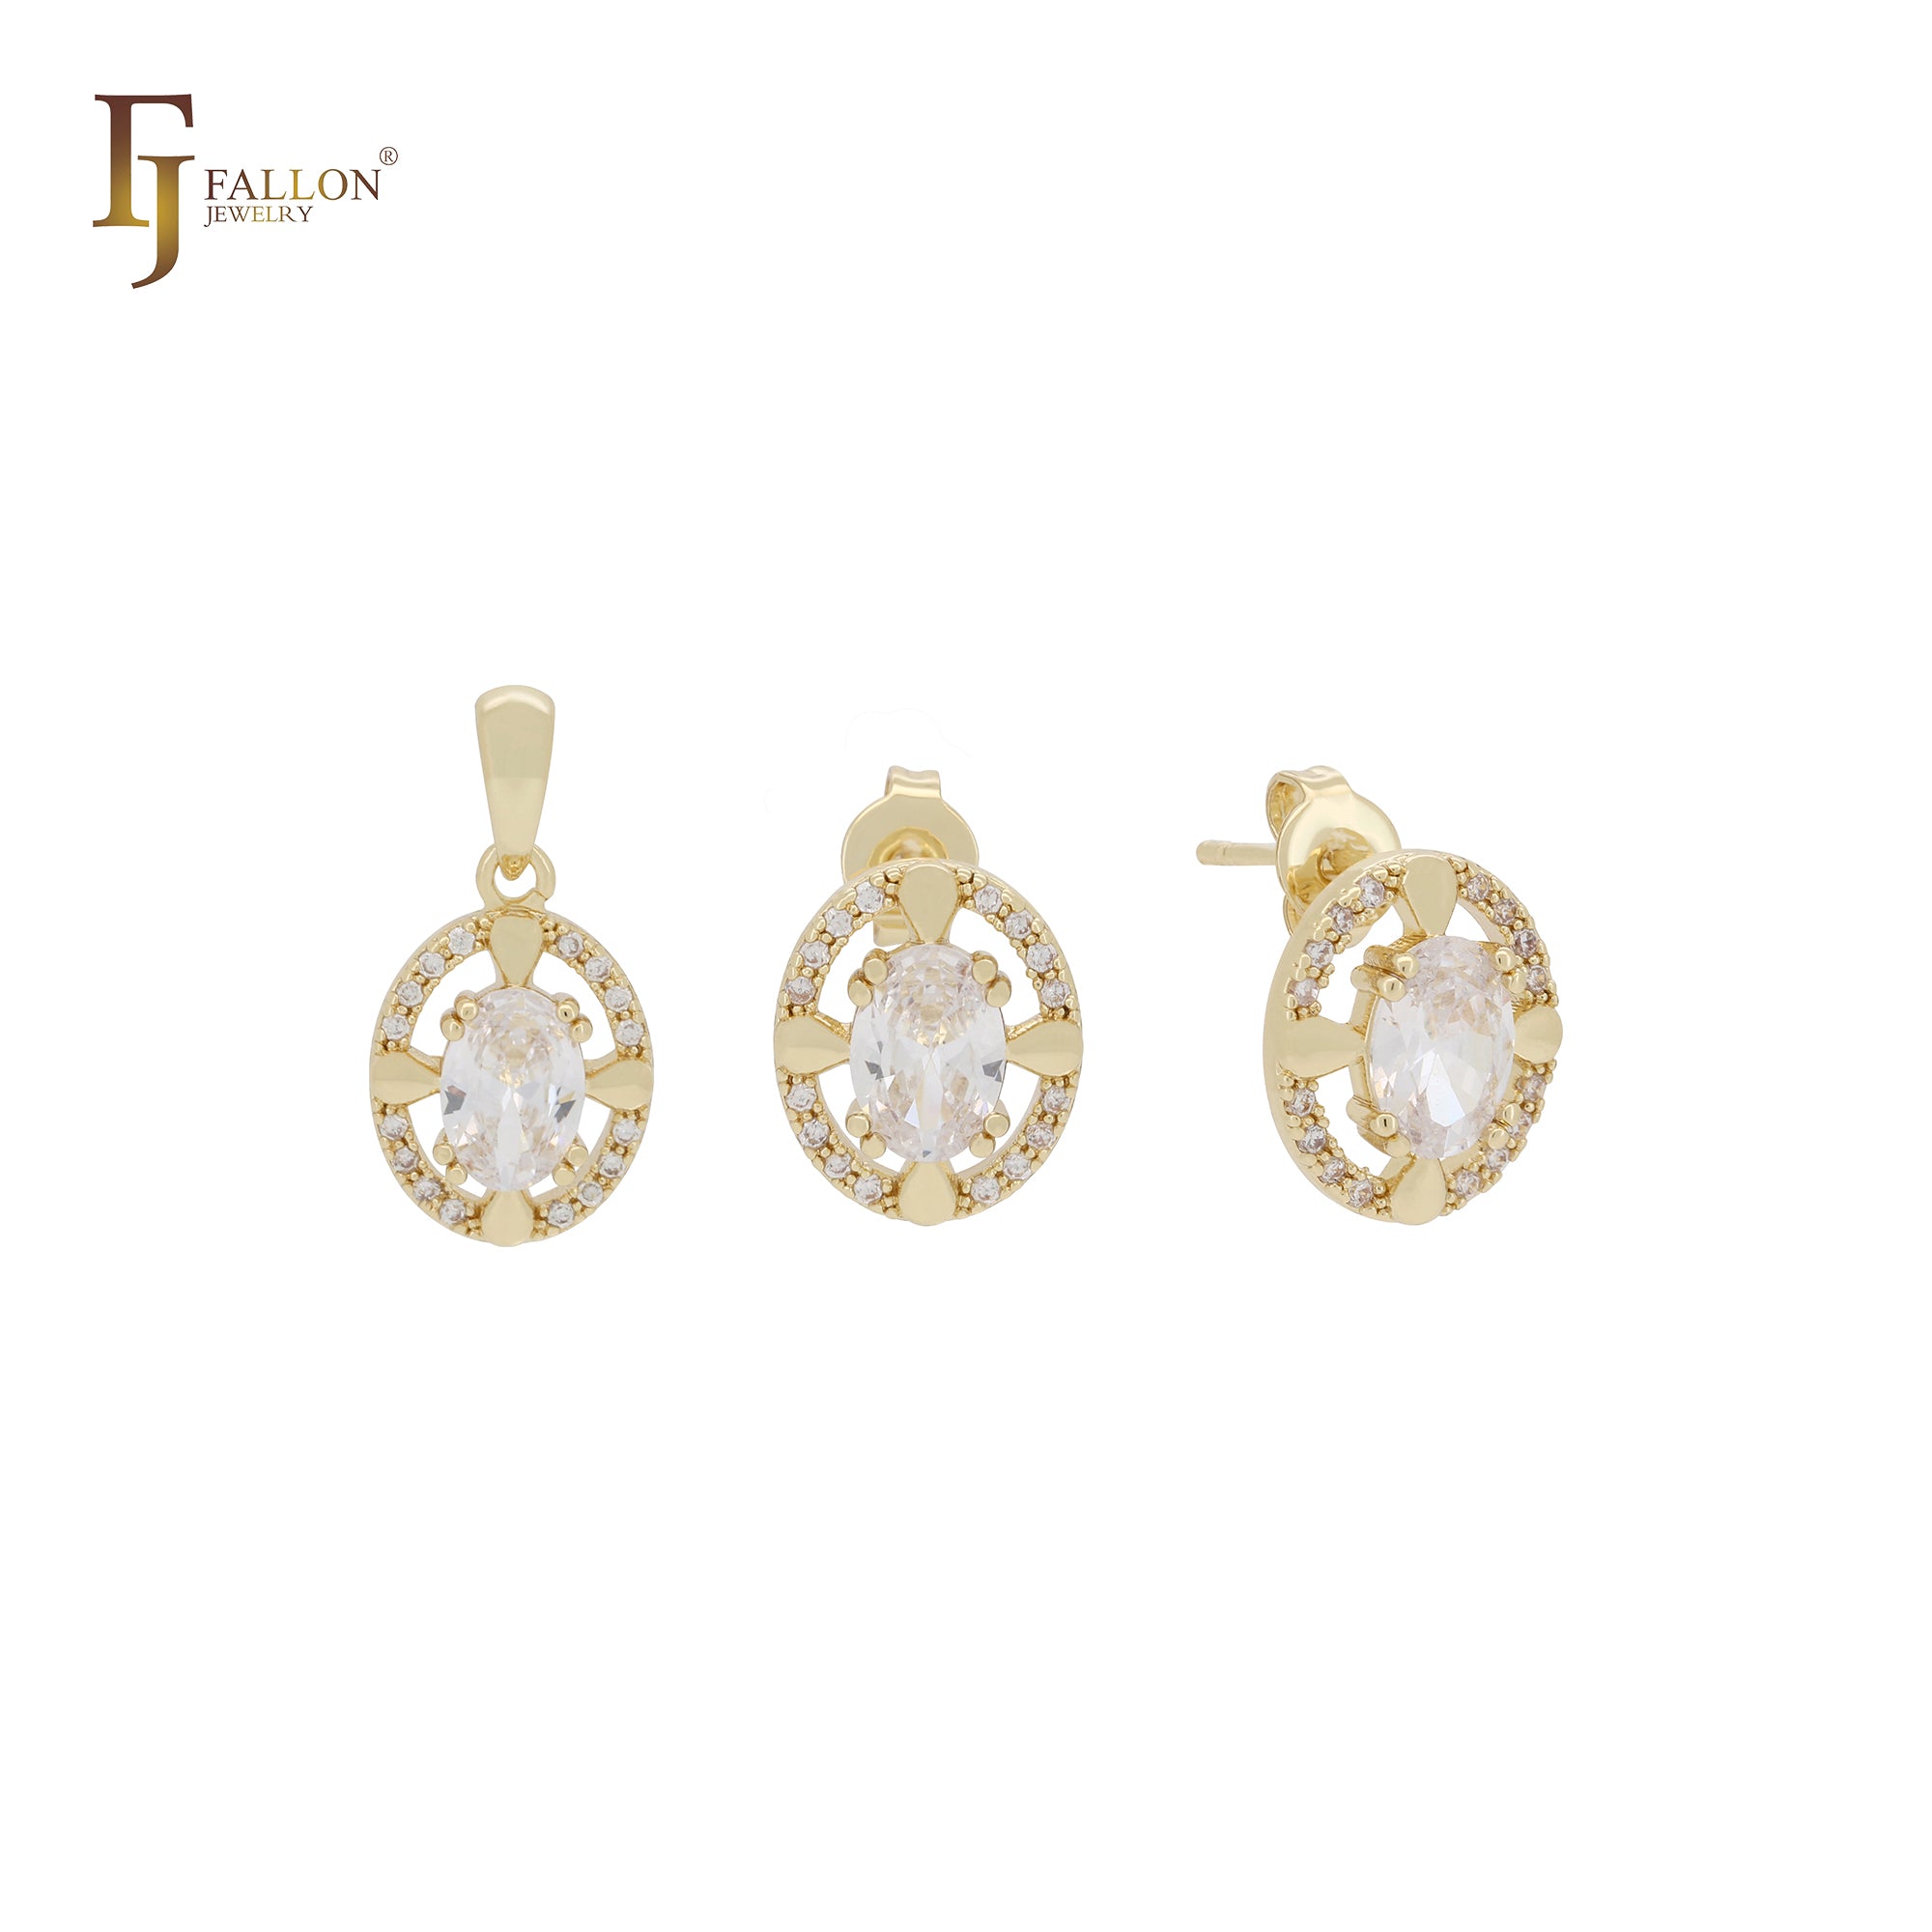 Petit tiny Oval solitaire white CZs cluster 14K Gold Jewelry Set with Pendant and Stud Earrings